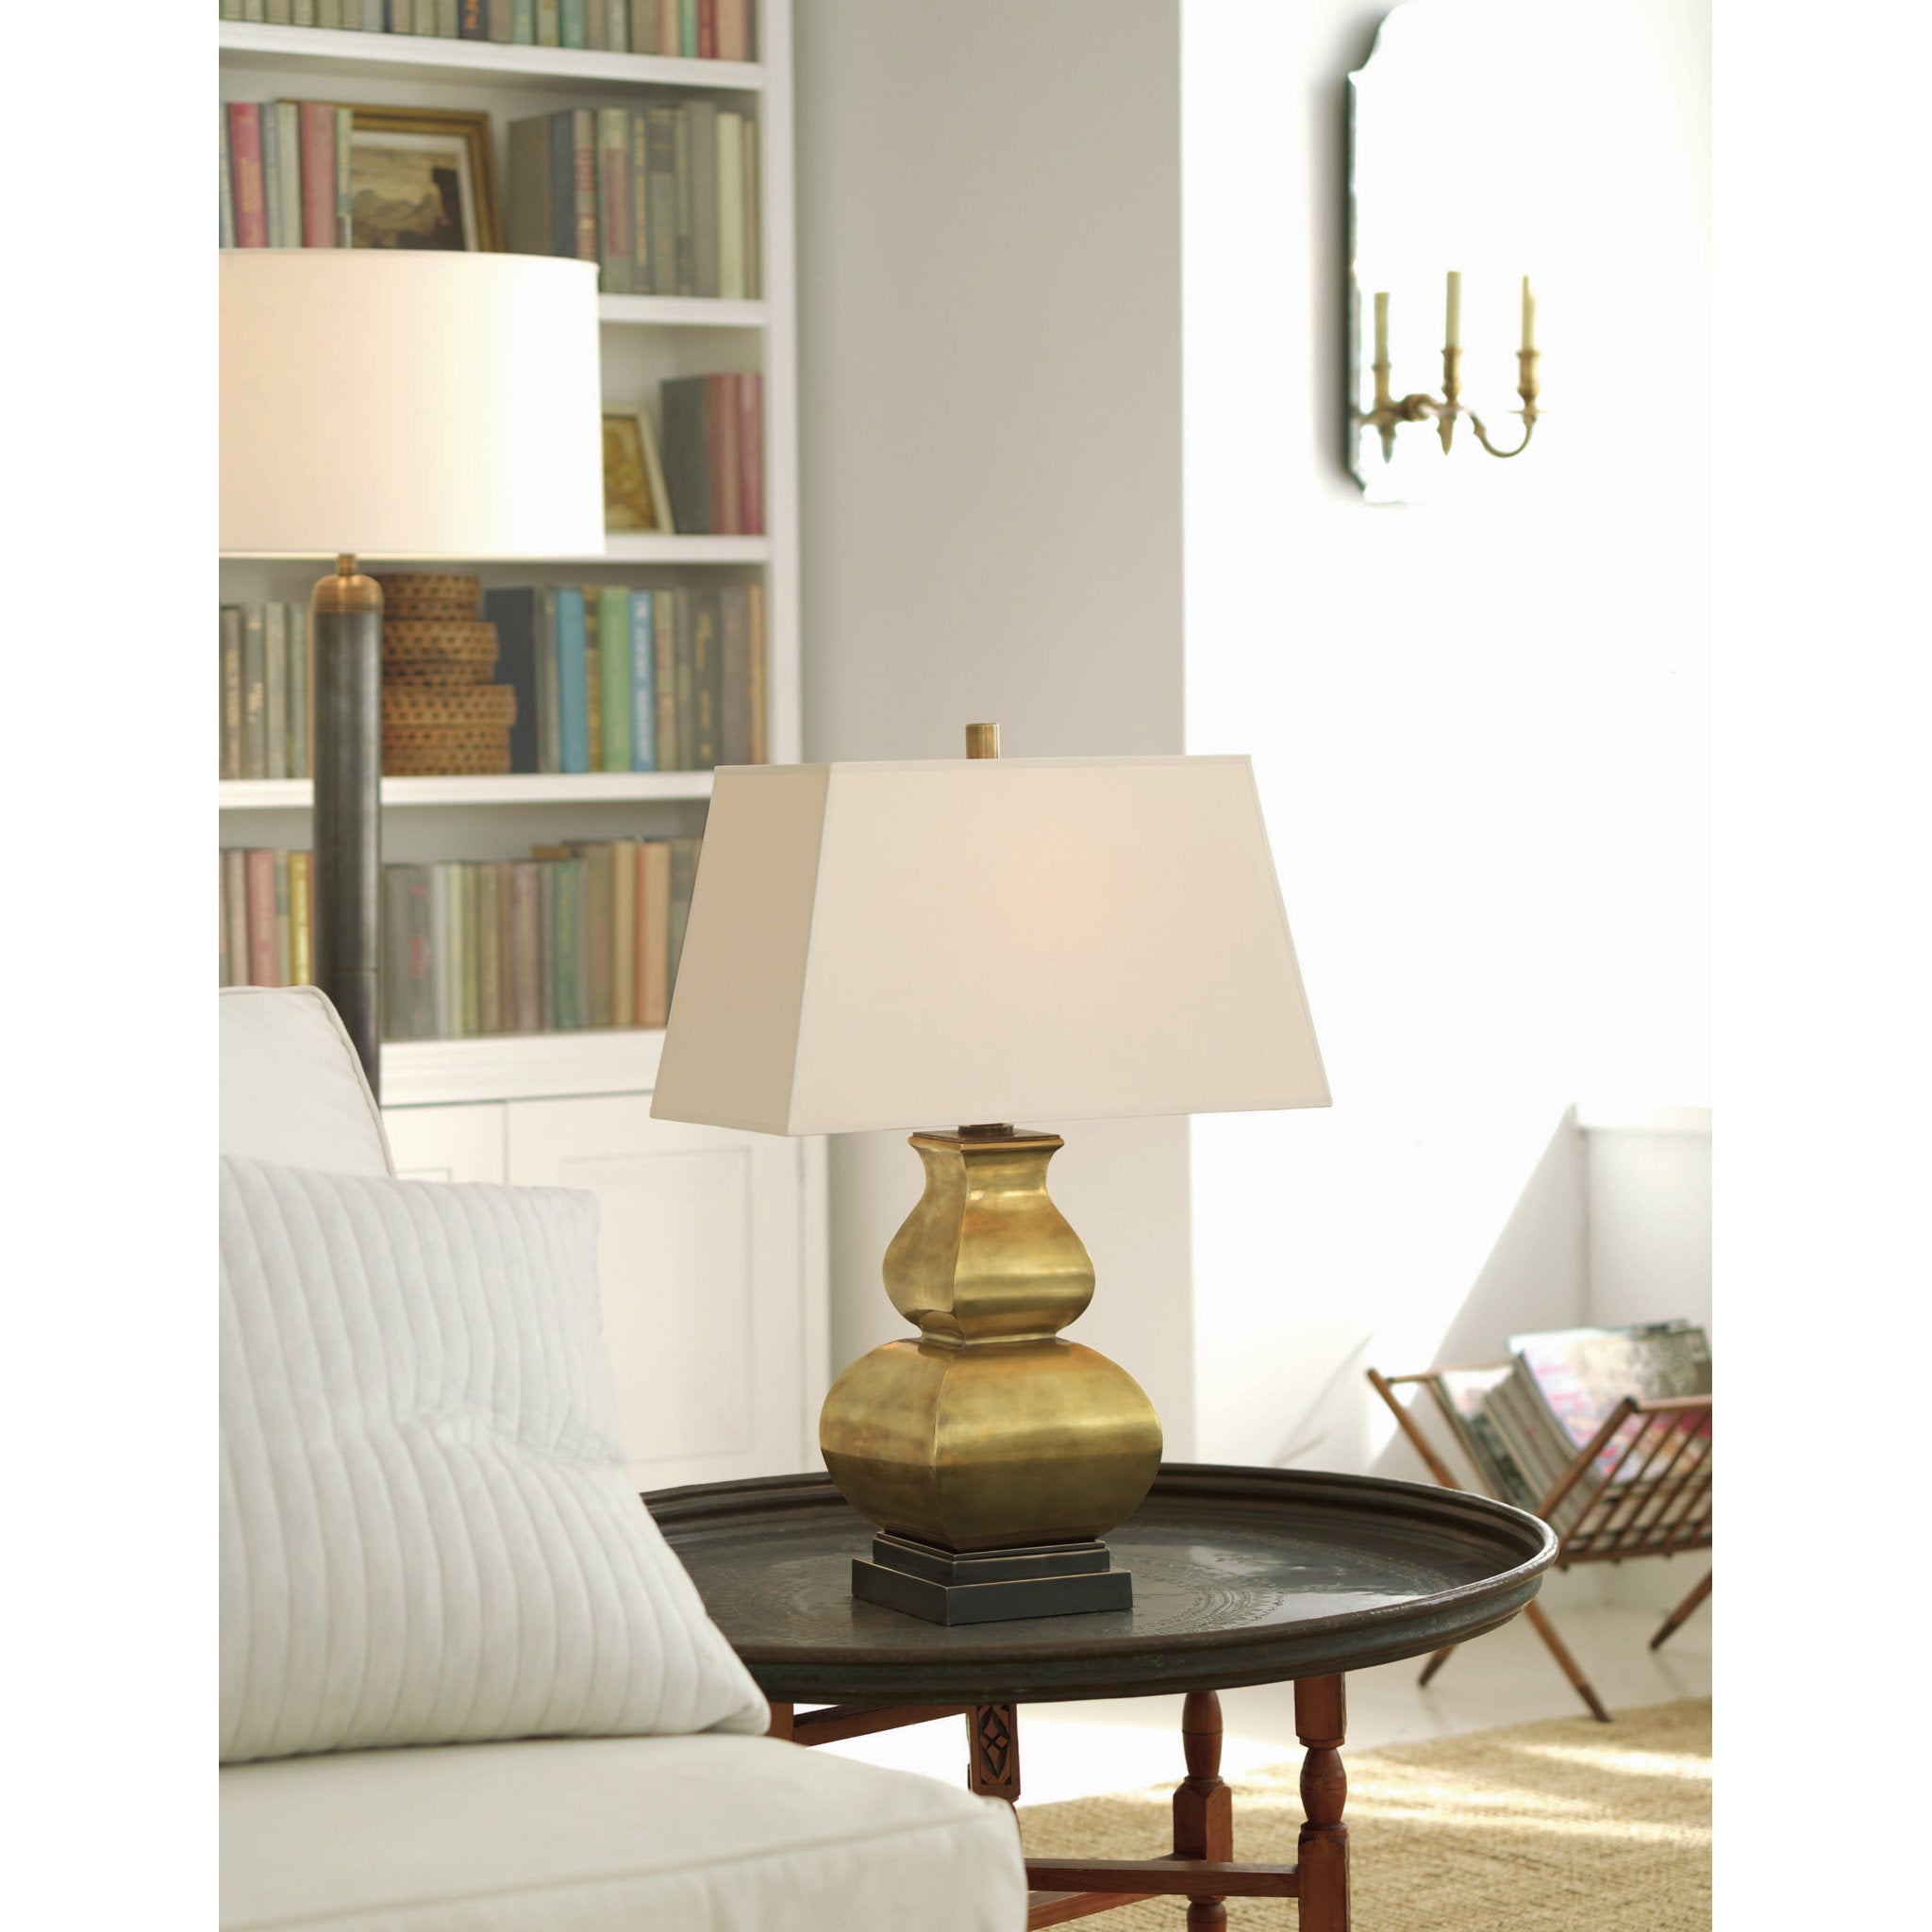 OBCHA8172ABB in Antique-burnished Brass by Visual Comfort in Frankfort, KY  - Classical Urn Form Medium Table Lamp in Antique-Burnished Brass with  Black Shade Open Box